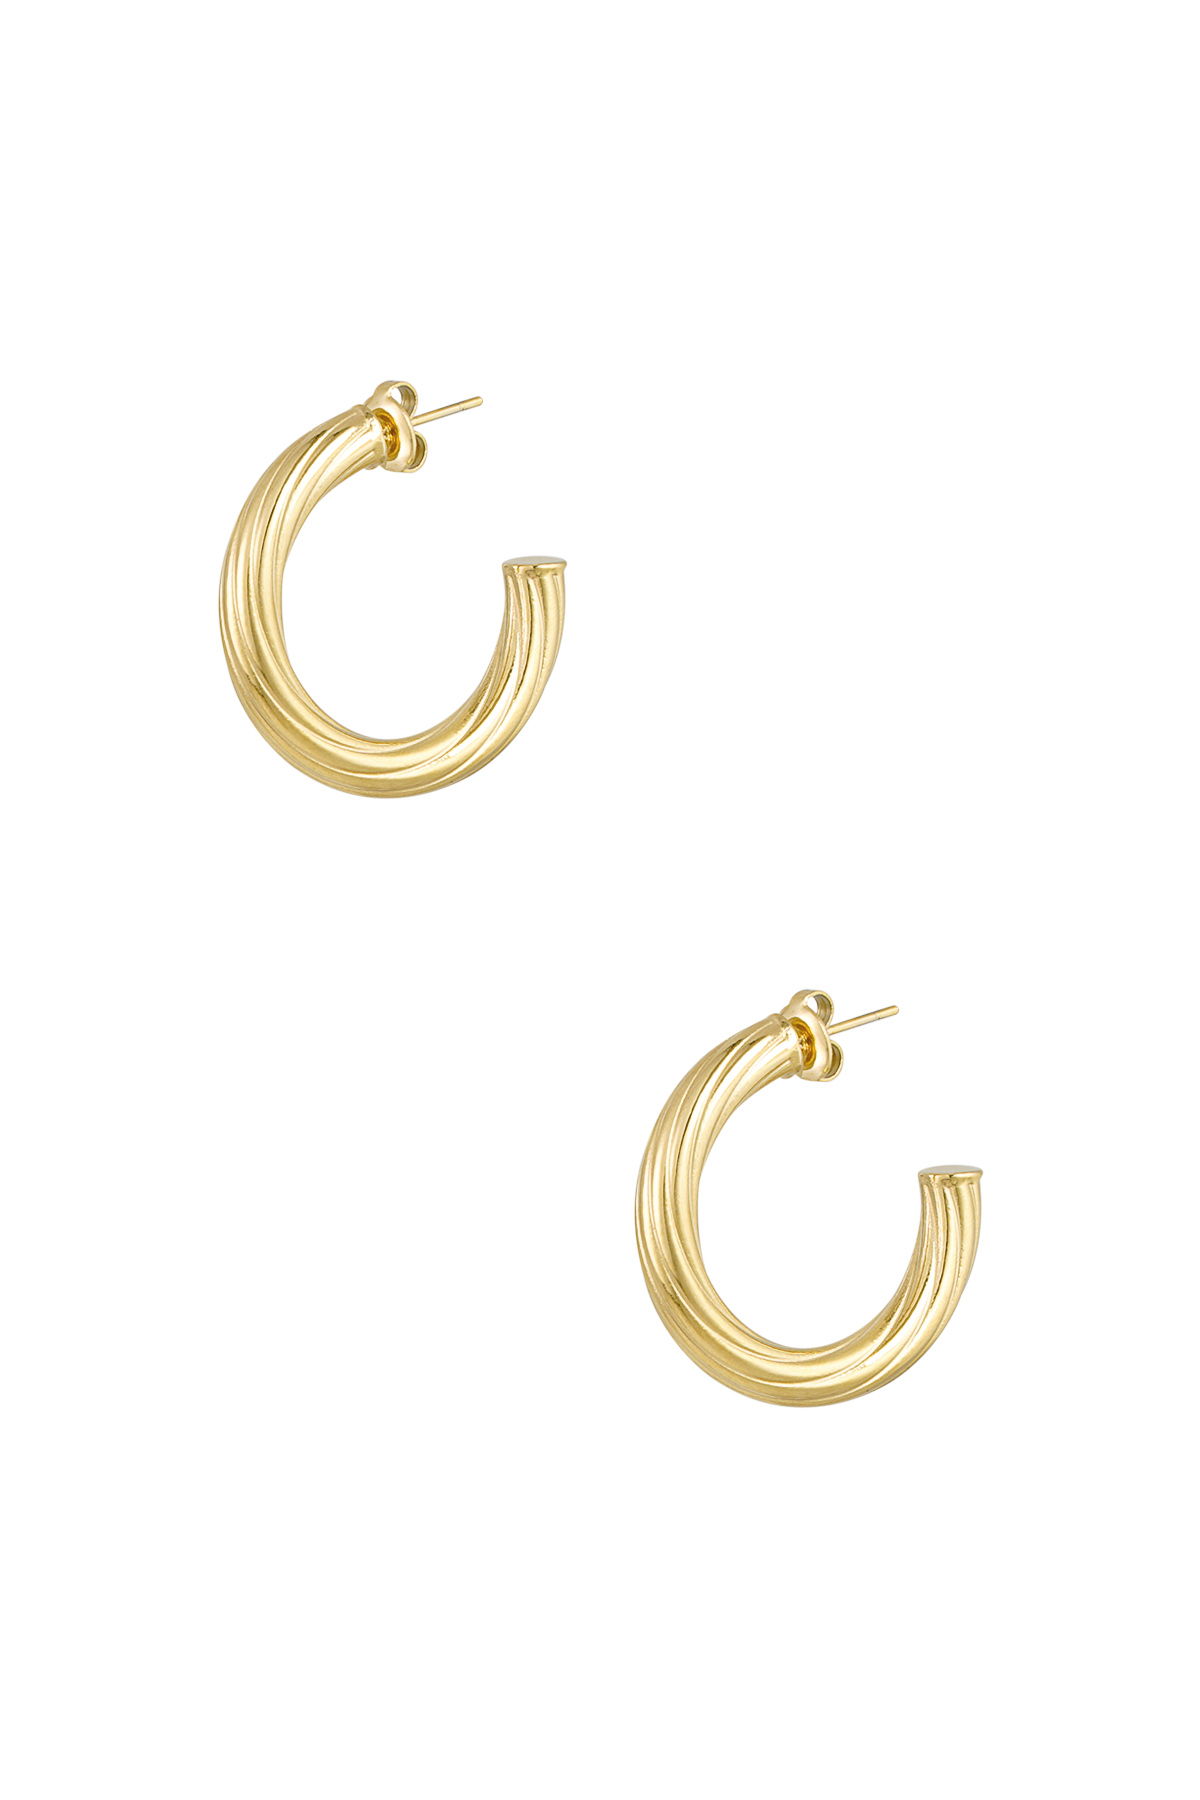 Earrings round stripes small - gold h5 